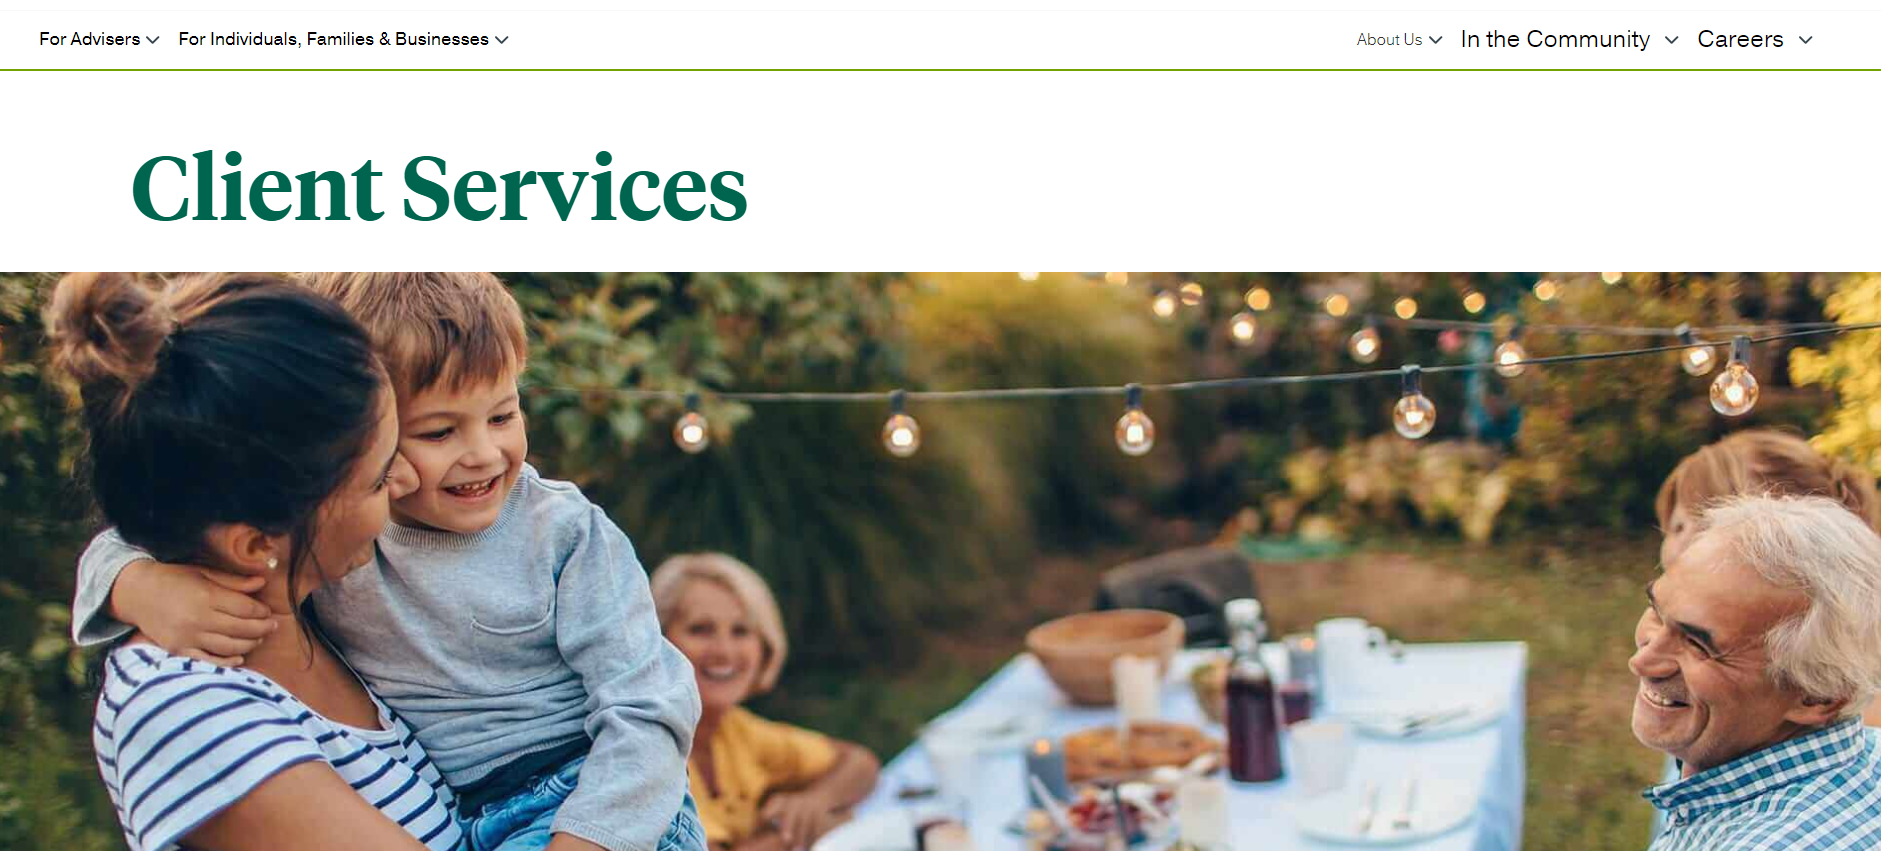 Penn Mutual life insurance Website Client services page